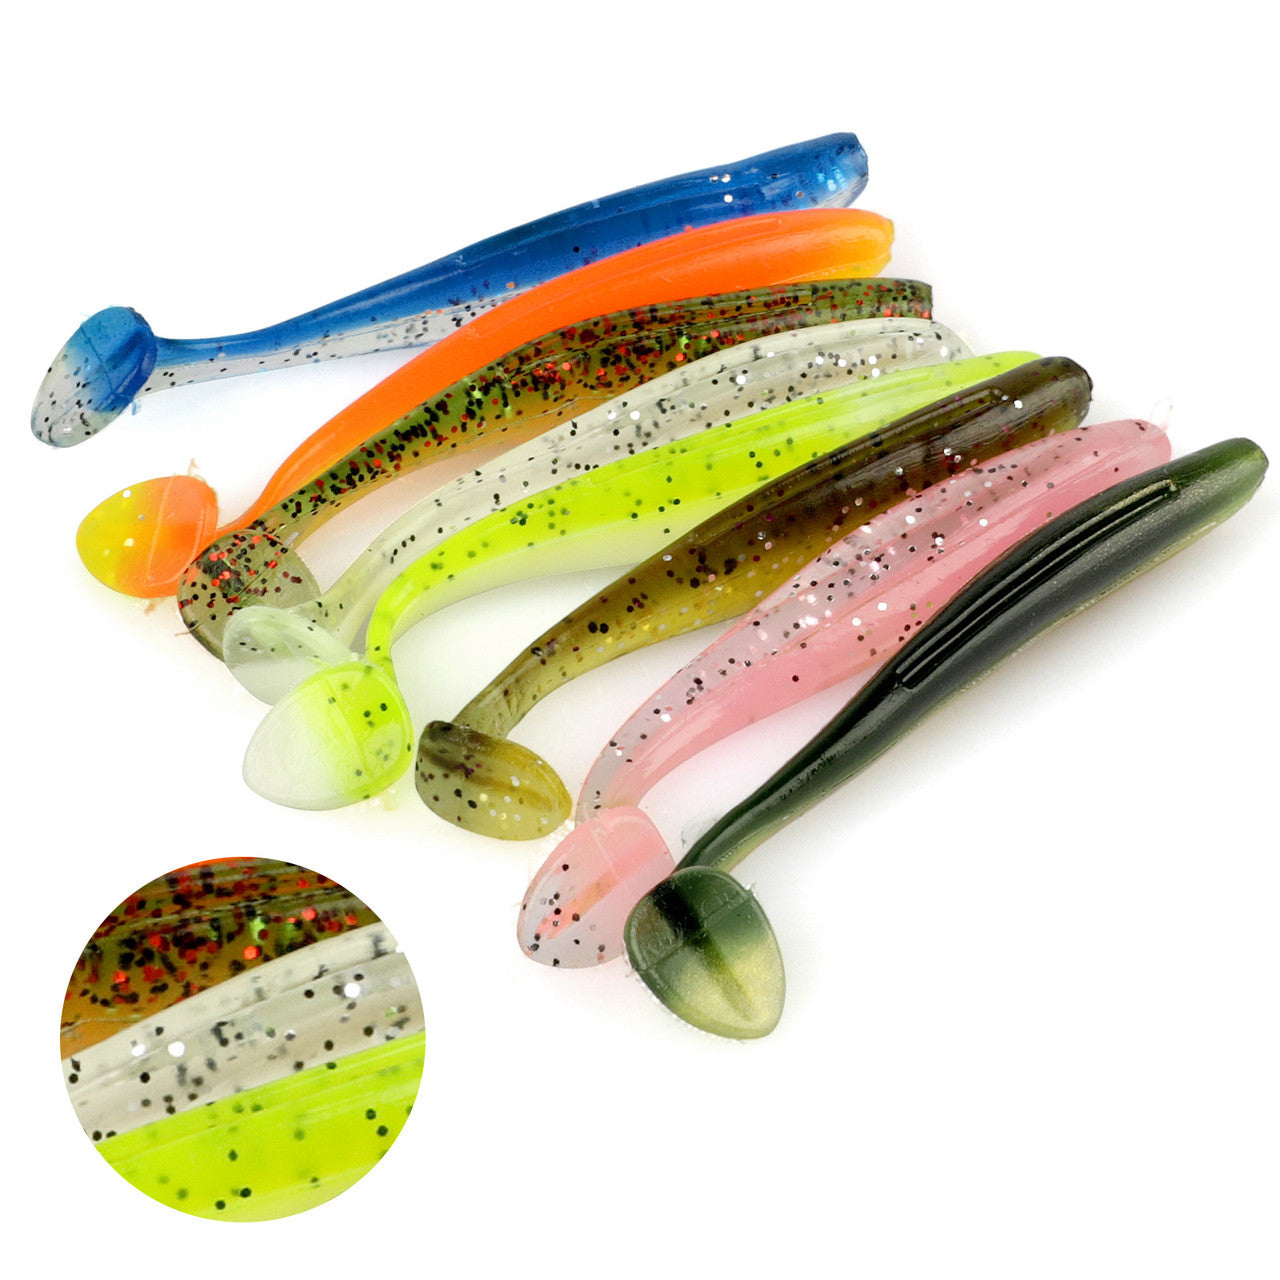 Assorted Mixture Crappie Fishing Lures Baits Tackle Kit for Freshwater or Saltwater, 50pcs